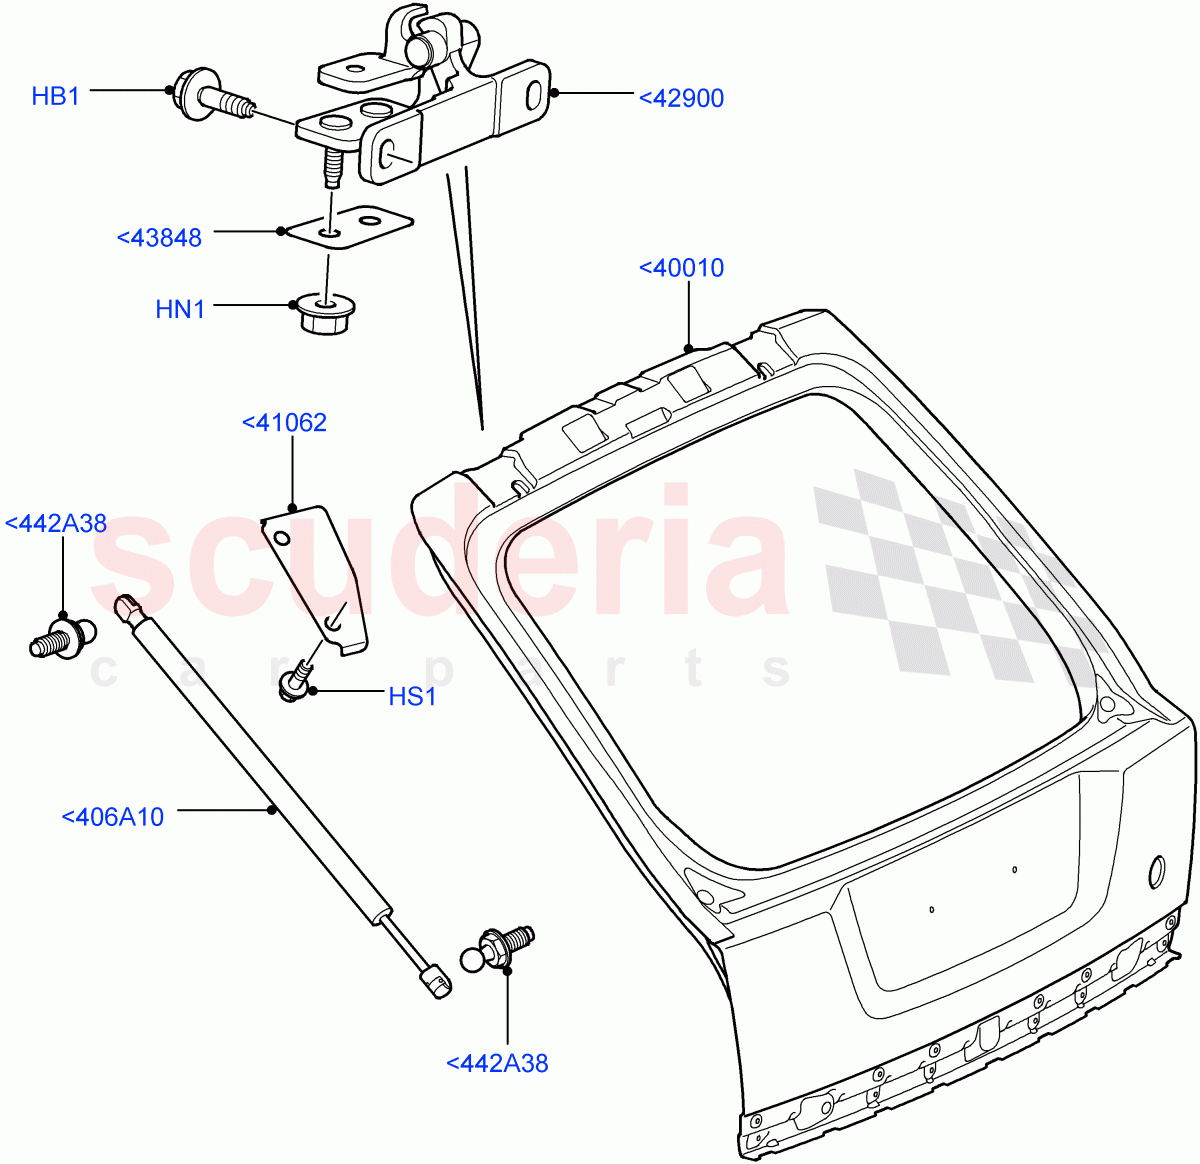 Luggage Compartment Door(Door And Fixings)((V)TO9A999999) of Land Rover Land Rover Range Rover Sport (2005-2009) [4.2 Petrol V8 Supercharged]